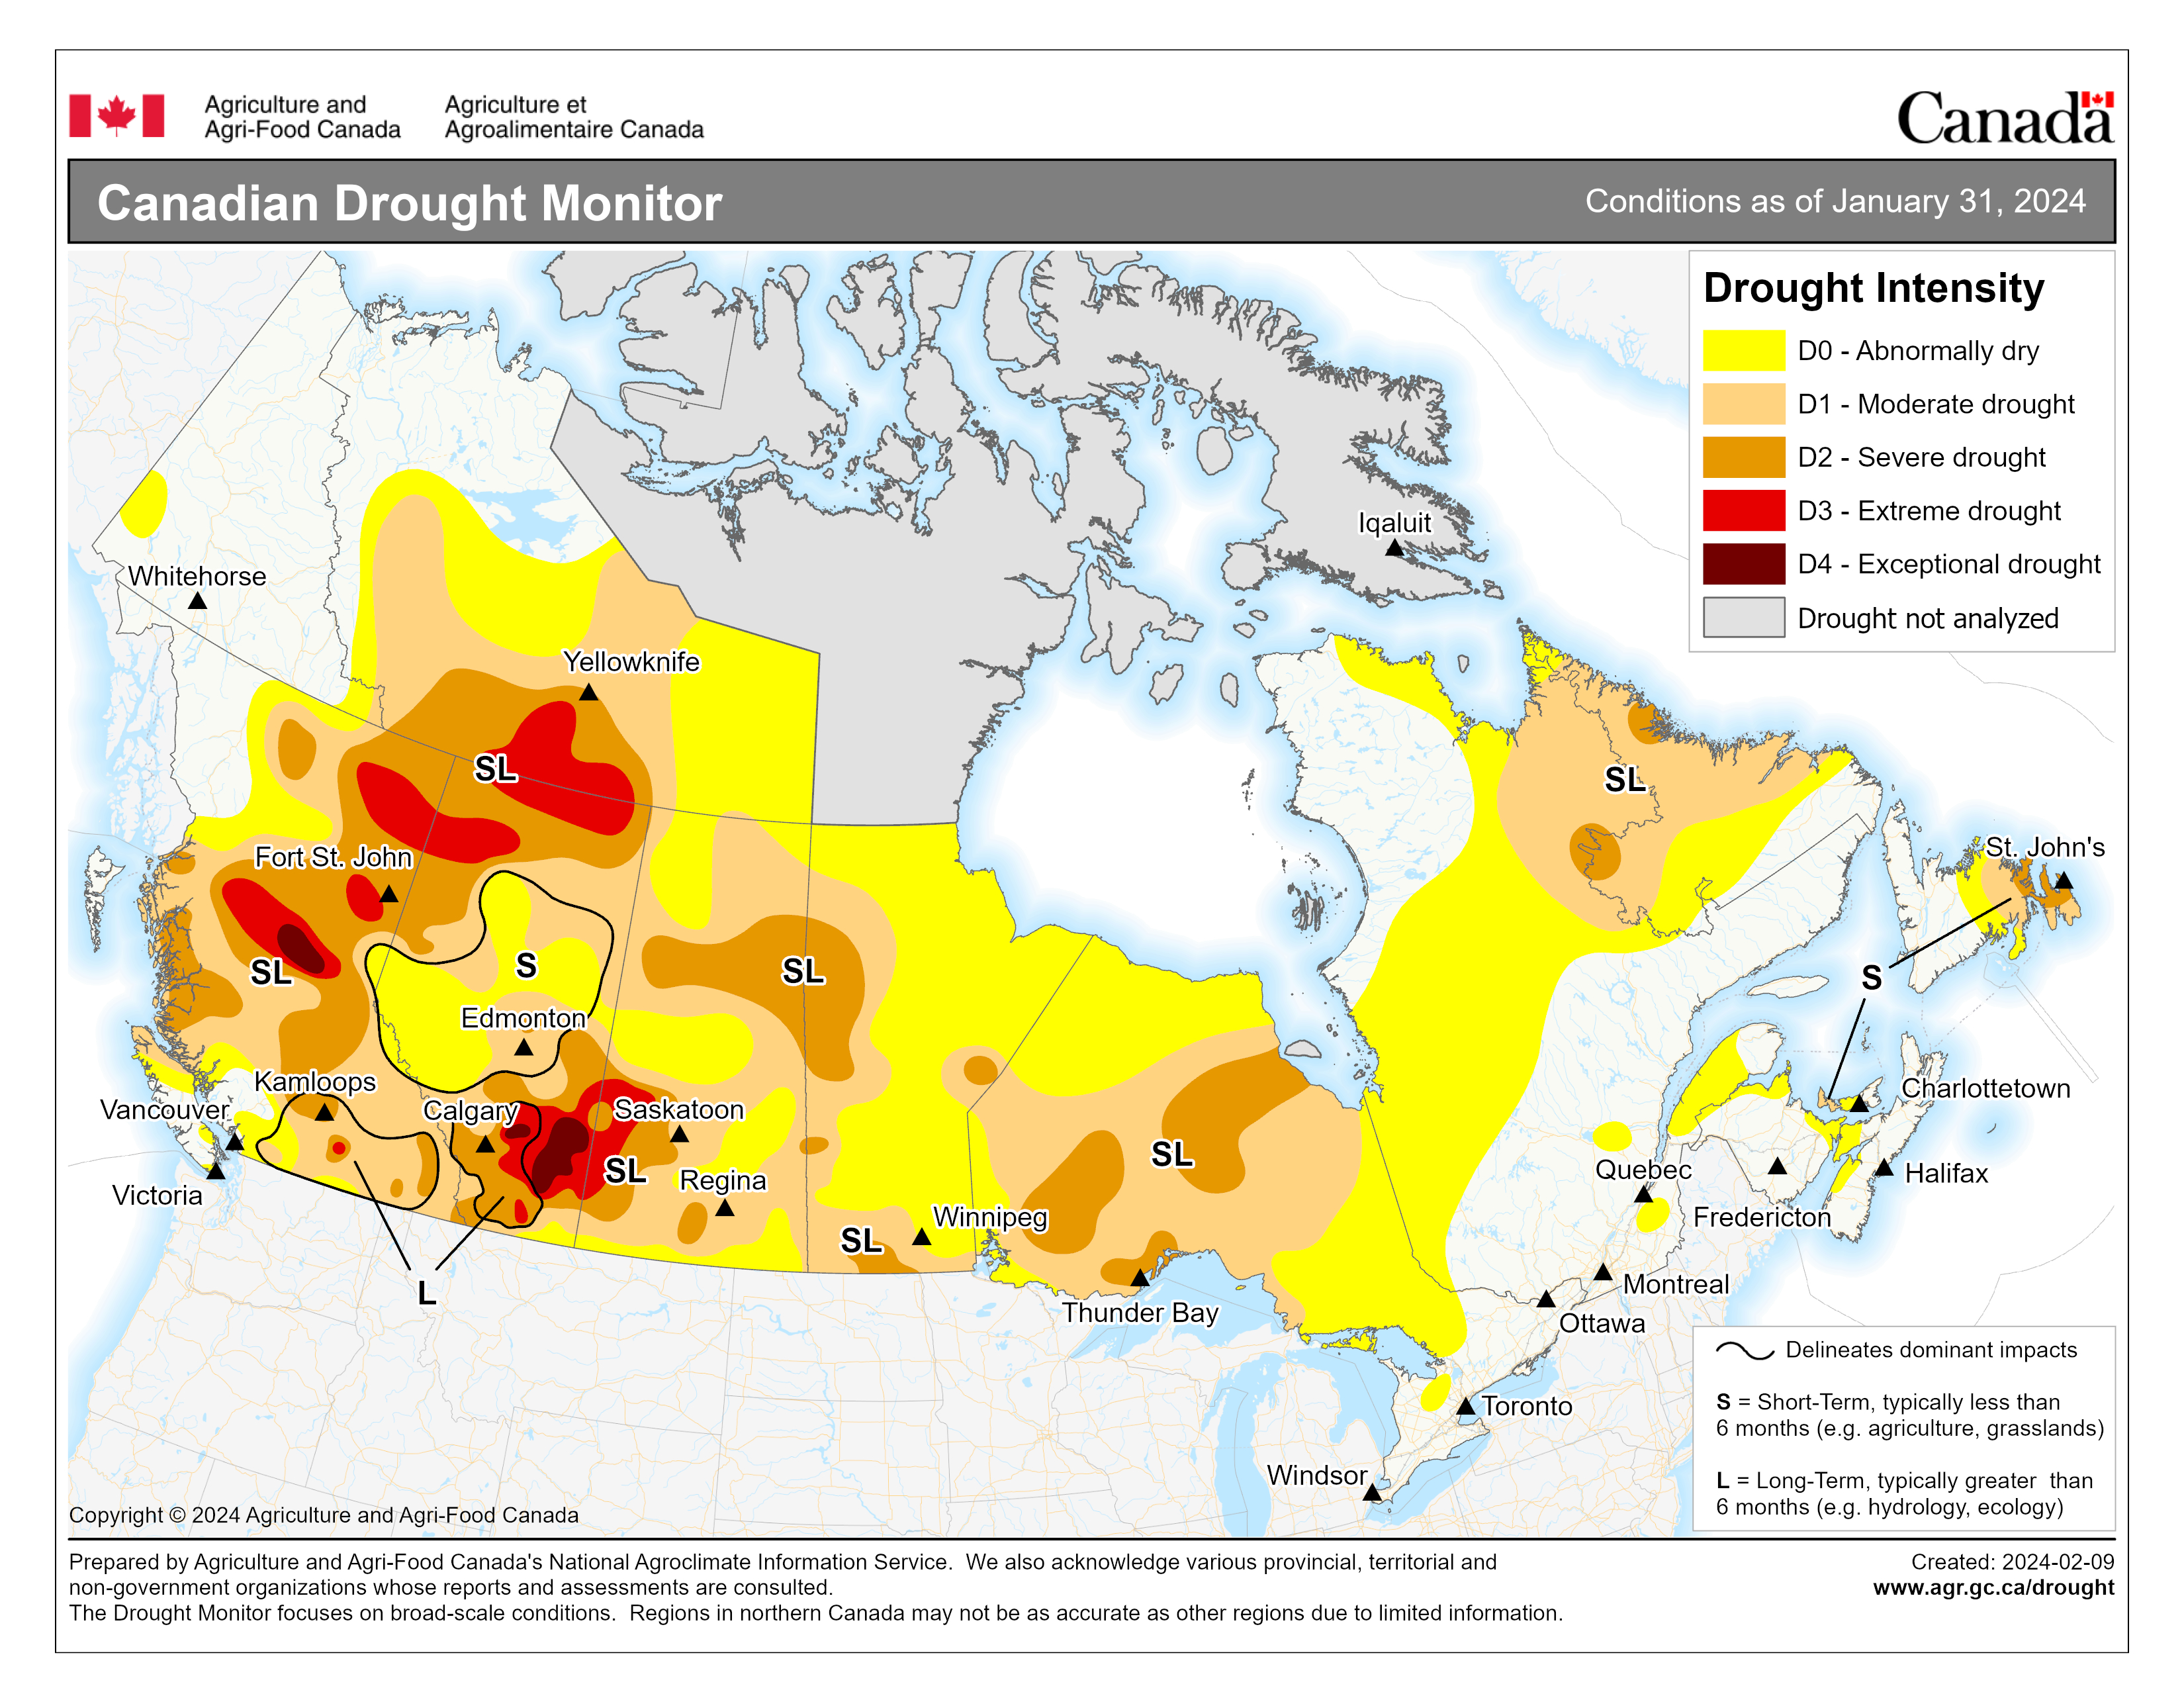 Map showing the Canadian Drought Monitor for conditions as of December 31 2023